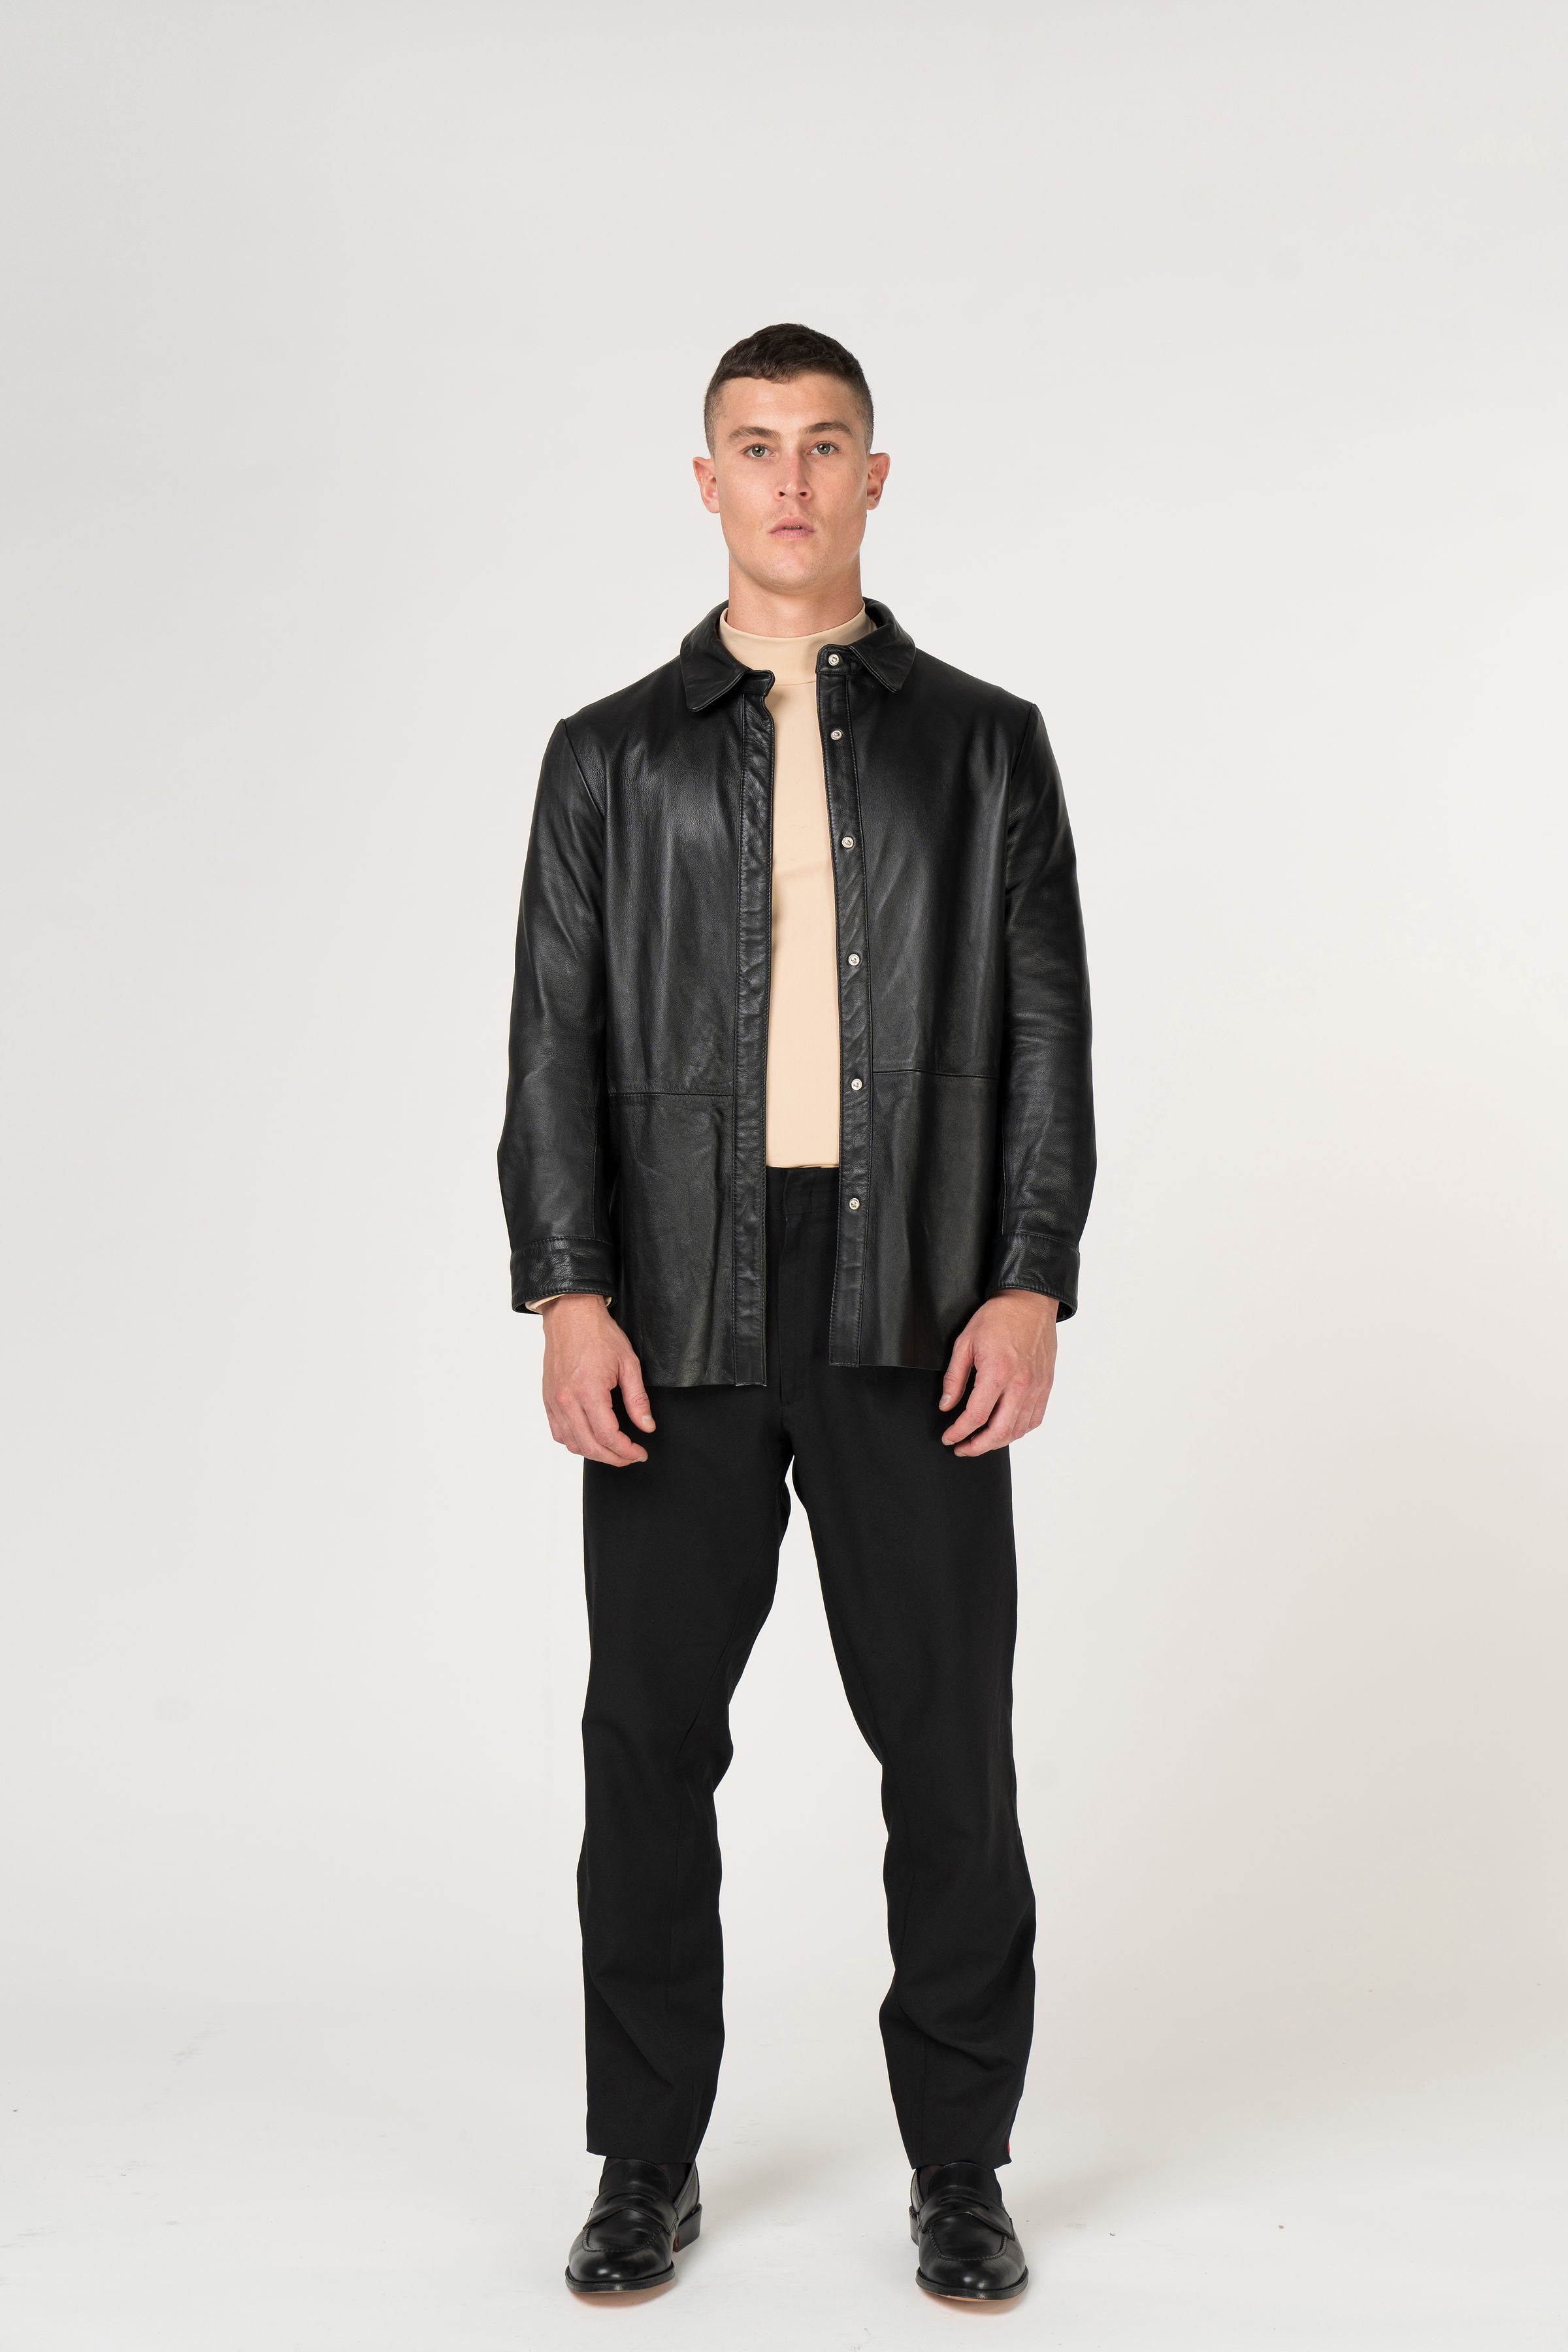 ALL LEATHER JACKETS & CLOTHES – guido1952.com